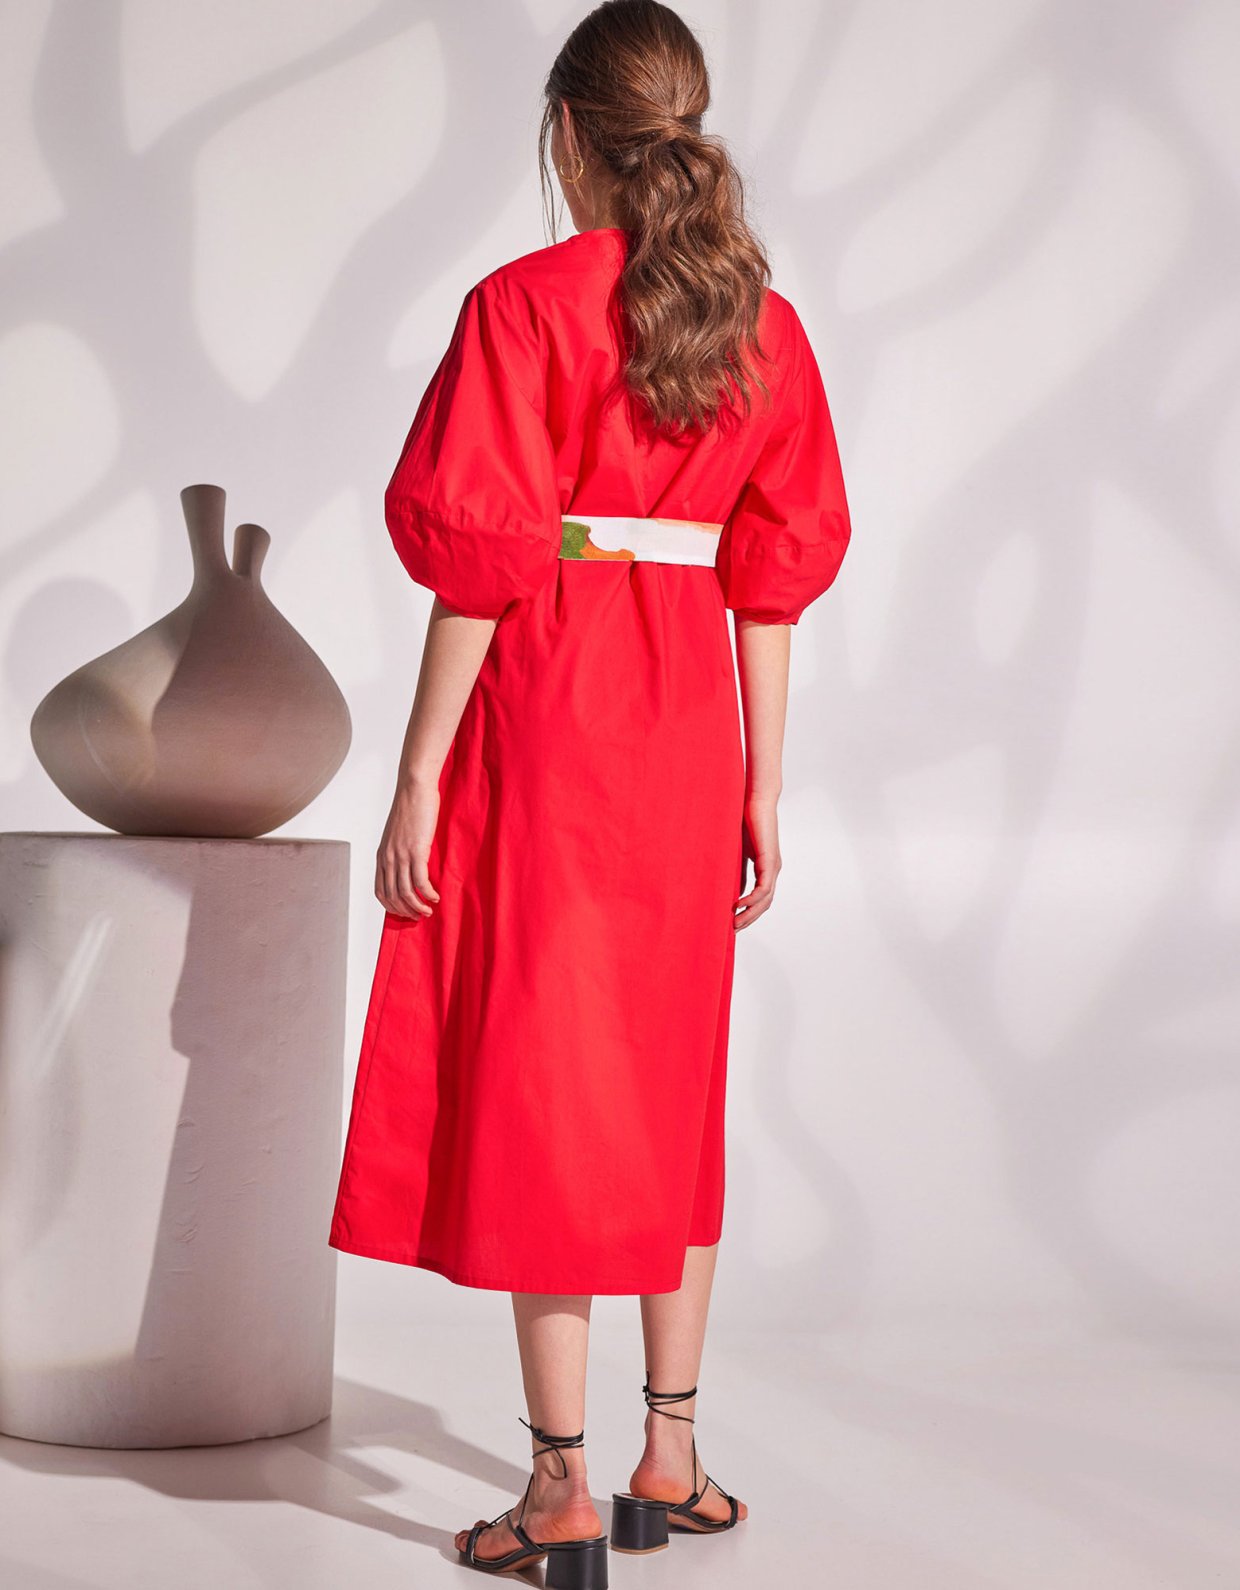 The Knl's Heritage dress red